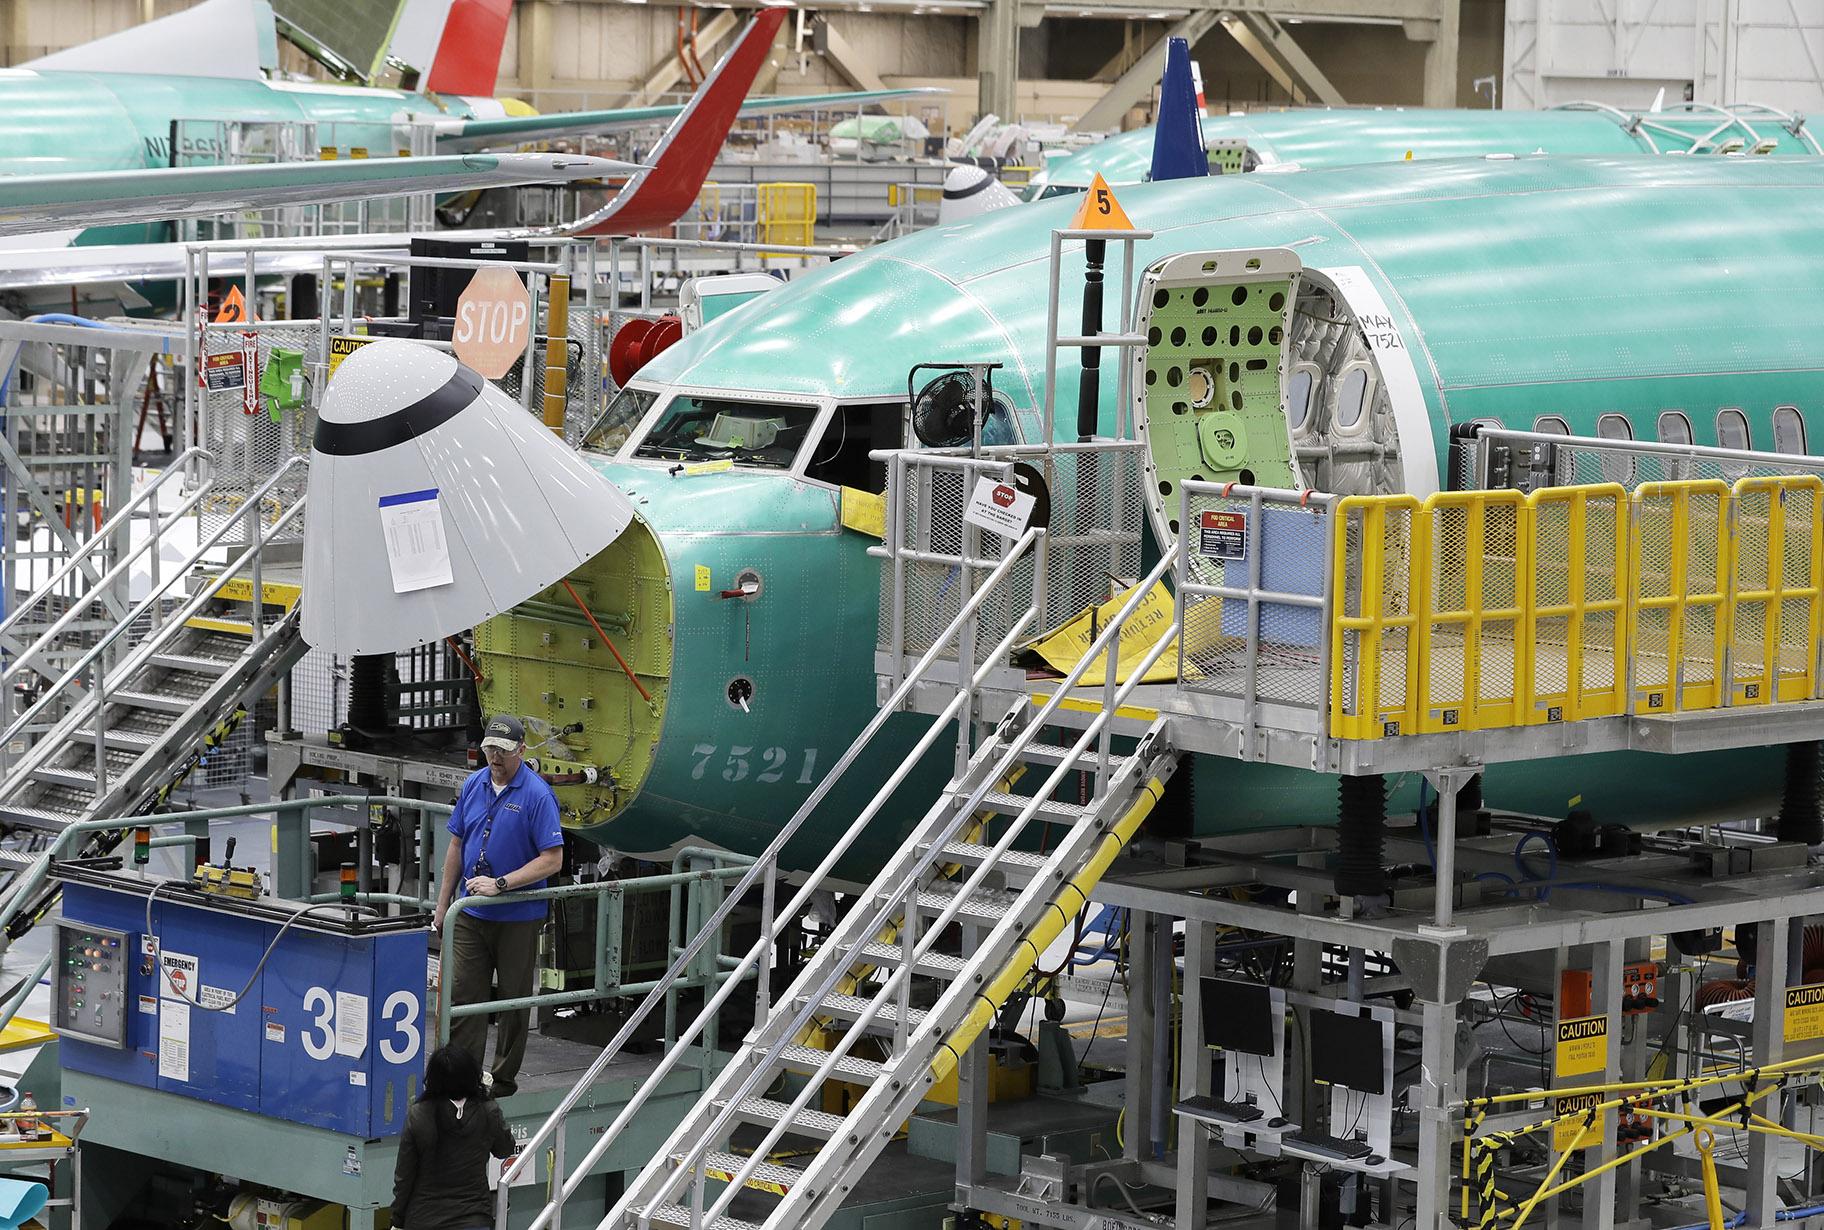 In this March 27, 2019, file photo, a Boeing 737 MAX 8 airplane is shown on the assembly line during a brief media tour of Boeing’s 737 assembly facility in Renton, Washington. (AP Photo / Ted S. Warren, File)